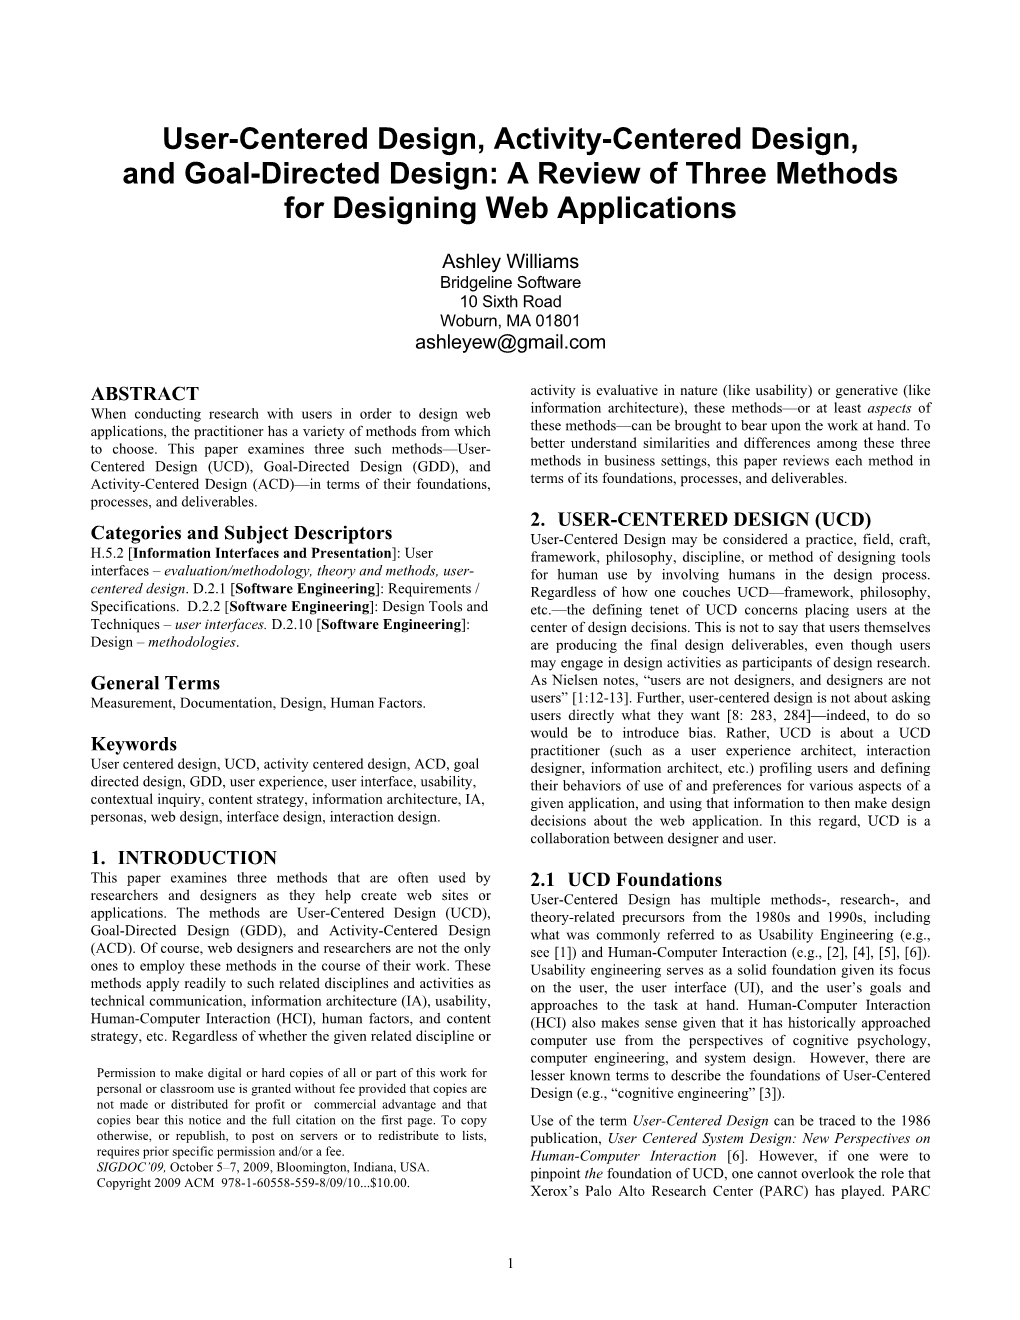 User-Centered Design, Activity-Centered Design, and Goal-Directed Design: a Review of Three Methods for Designing Web Applications